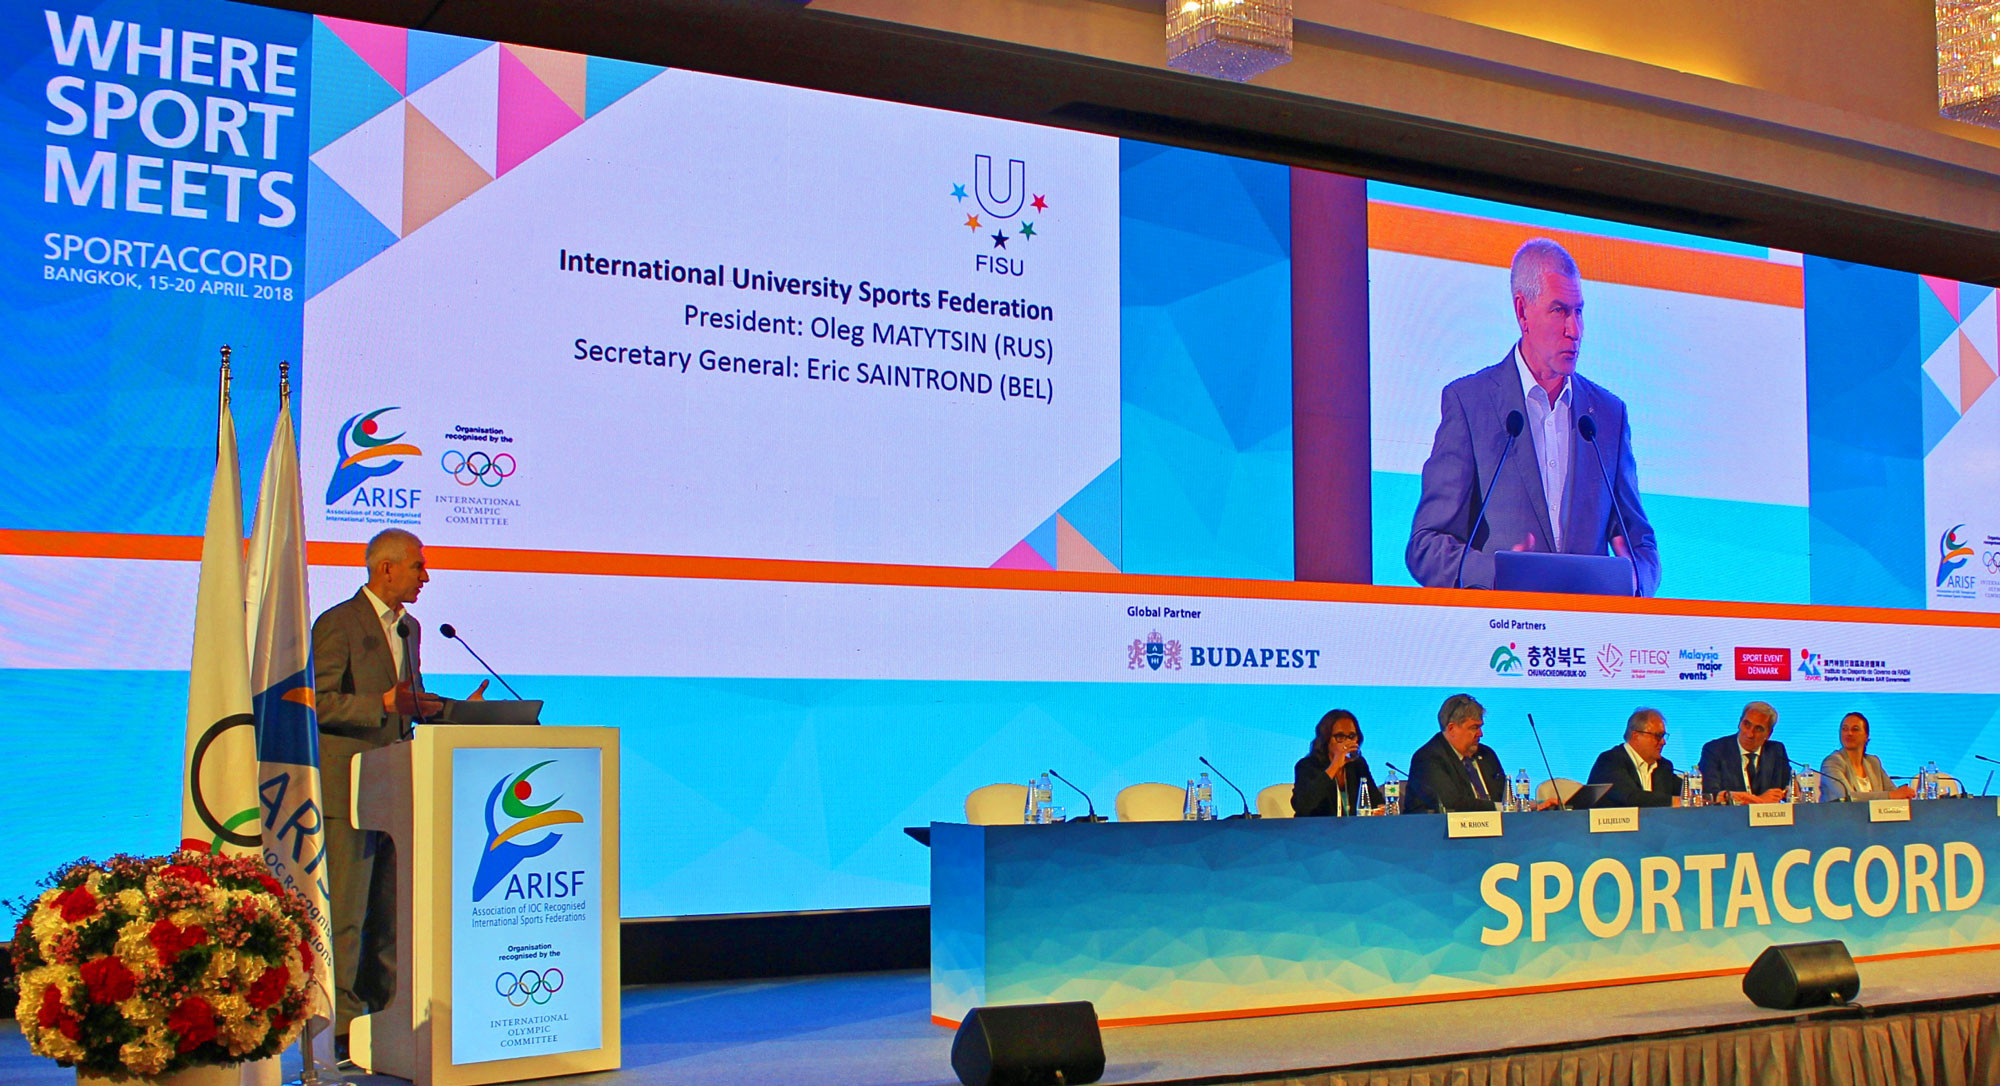 FISU President highlights organisation’s ambition for deeper integration of university sports into Olympic Movement